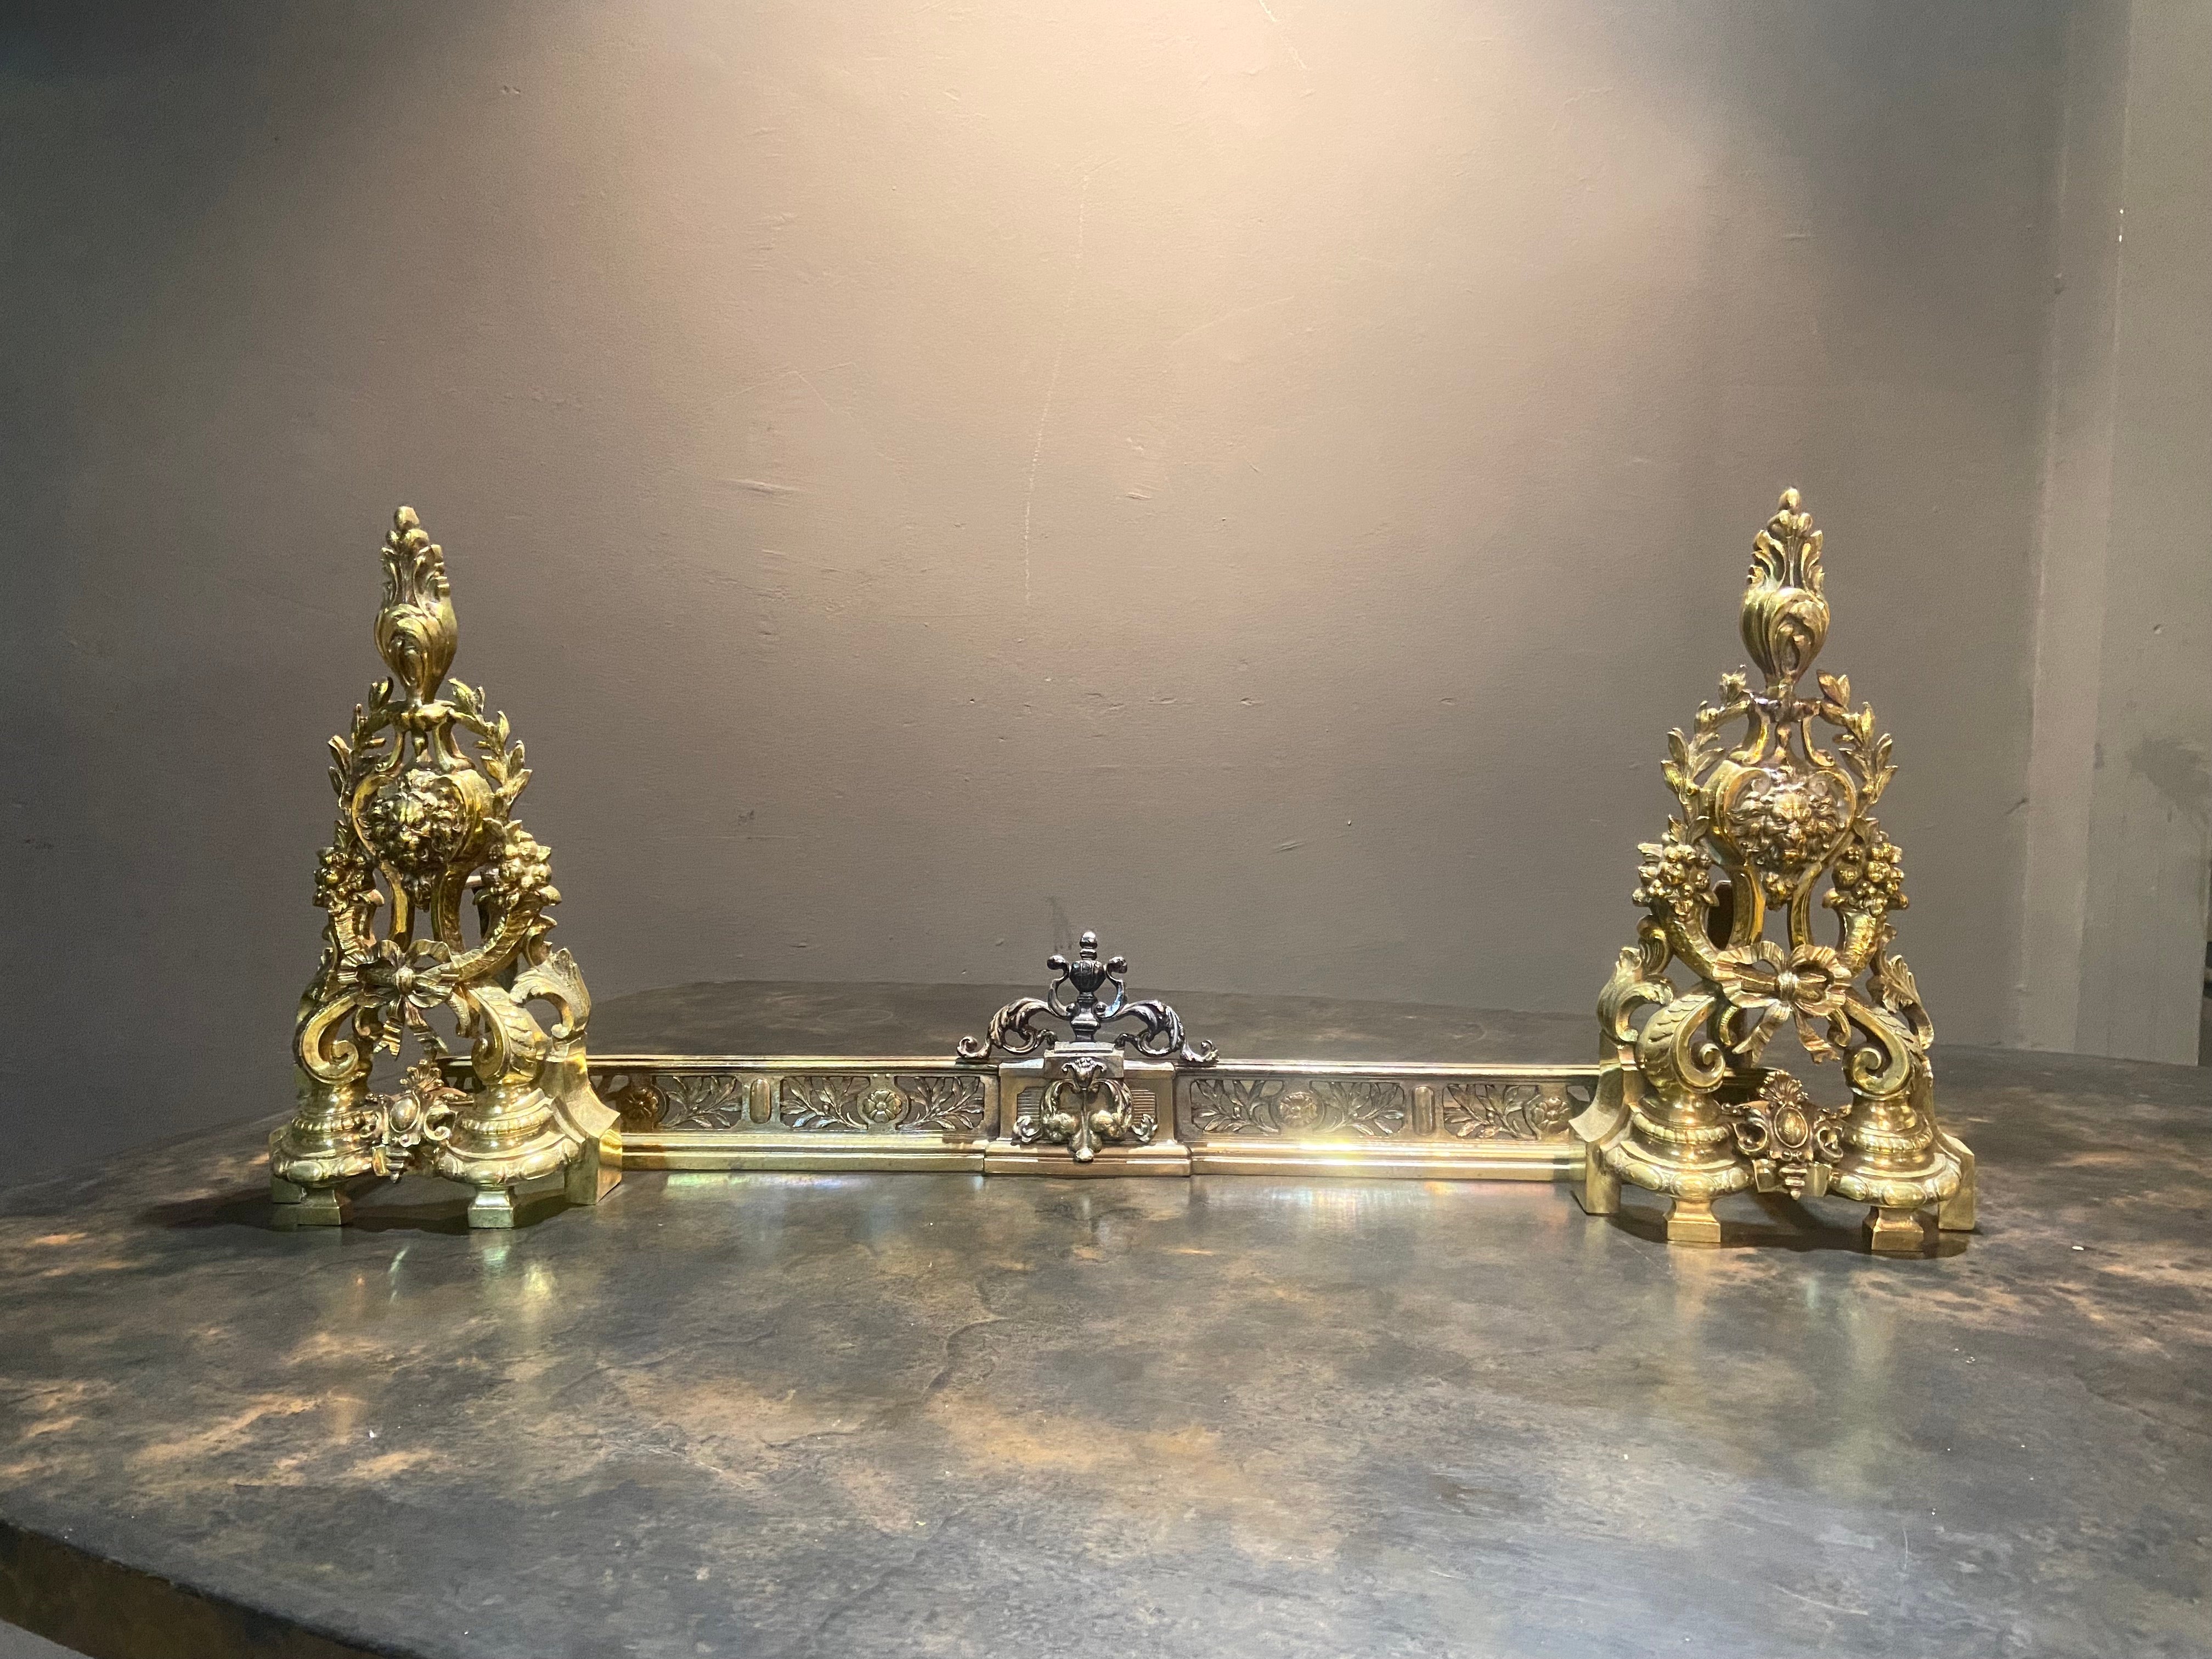 French mid-19th century Louis XVI style adjustable bronze fire fender with rich decoration.
France, circa 1870.